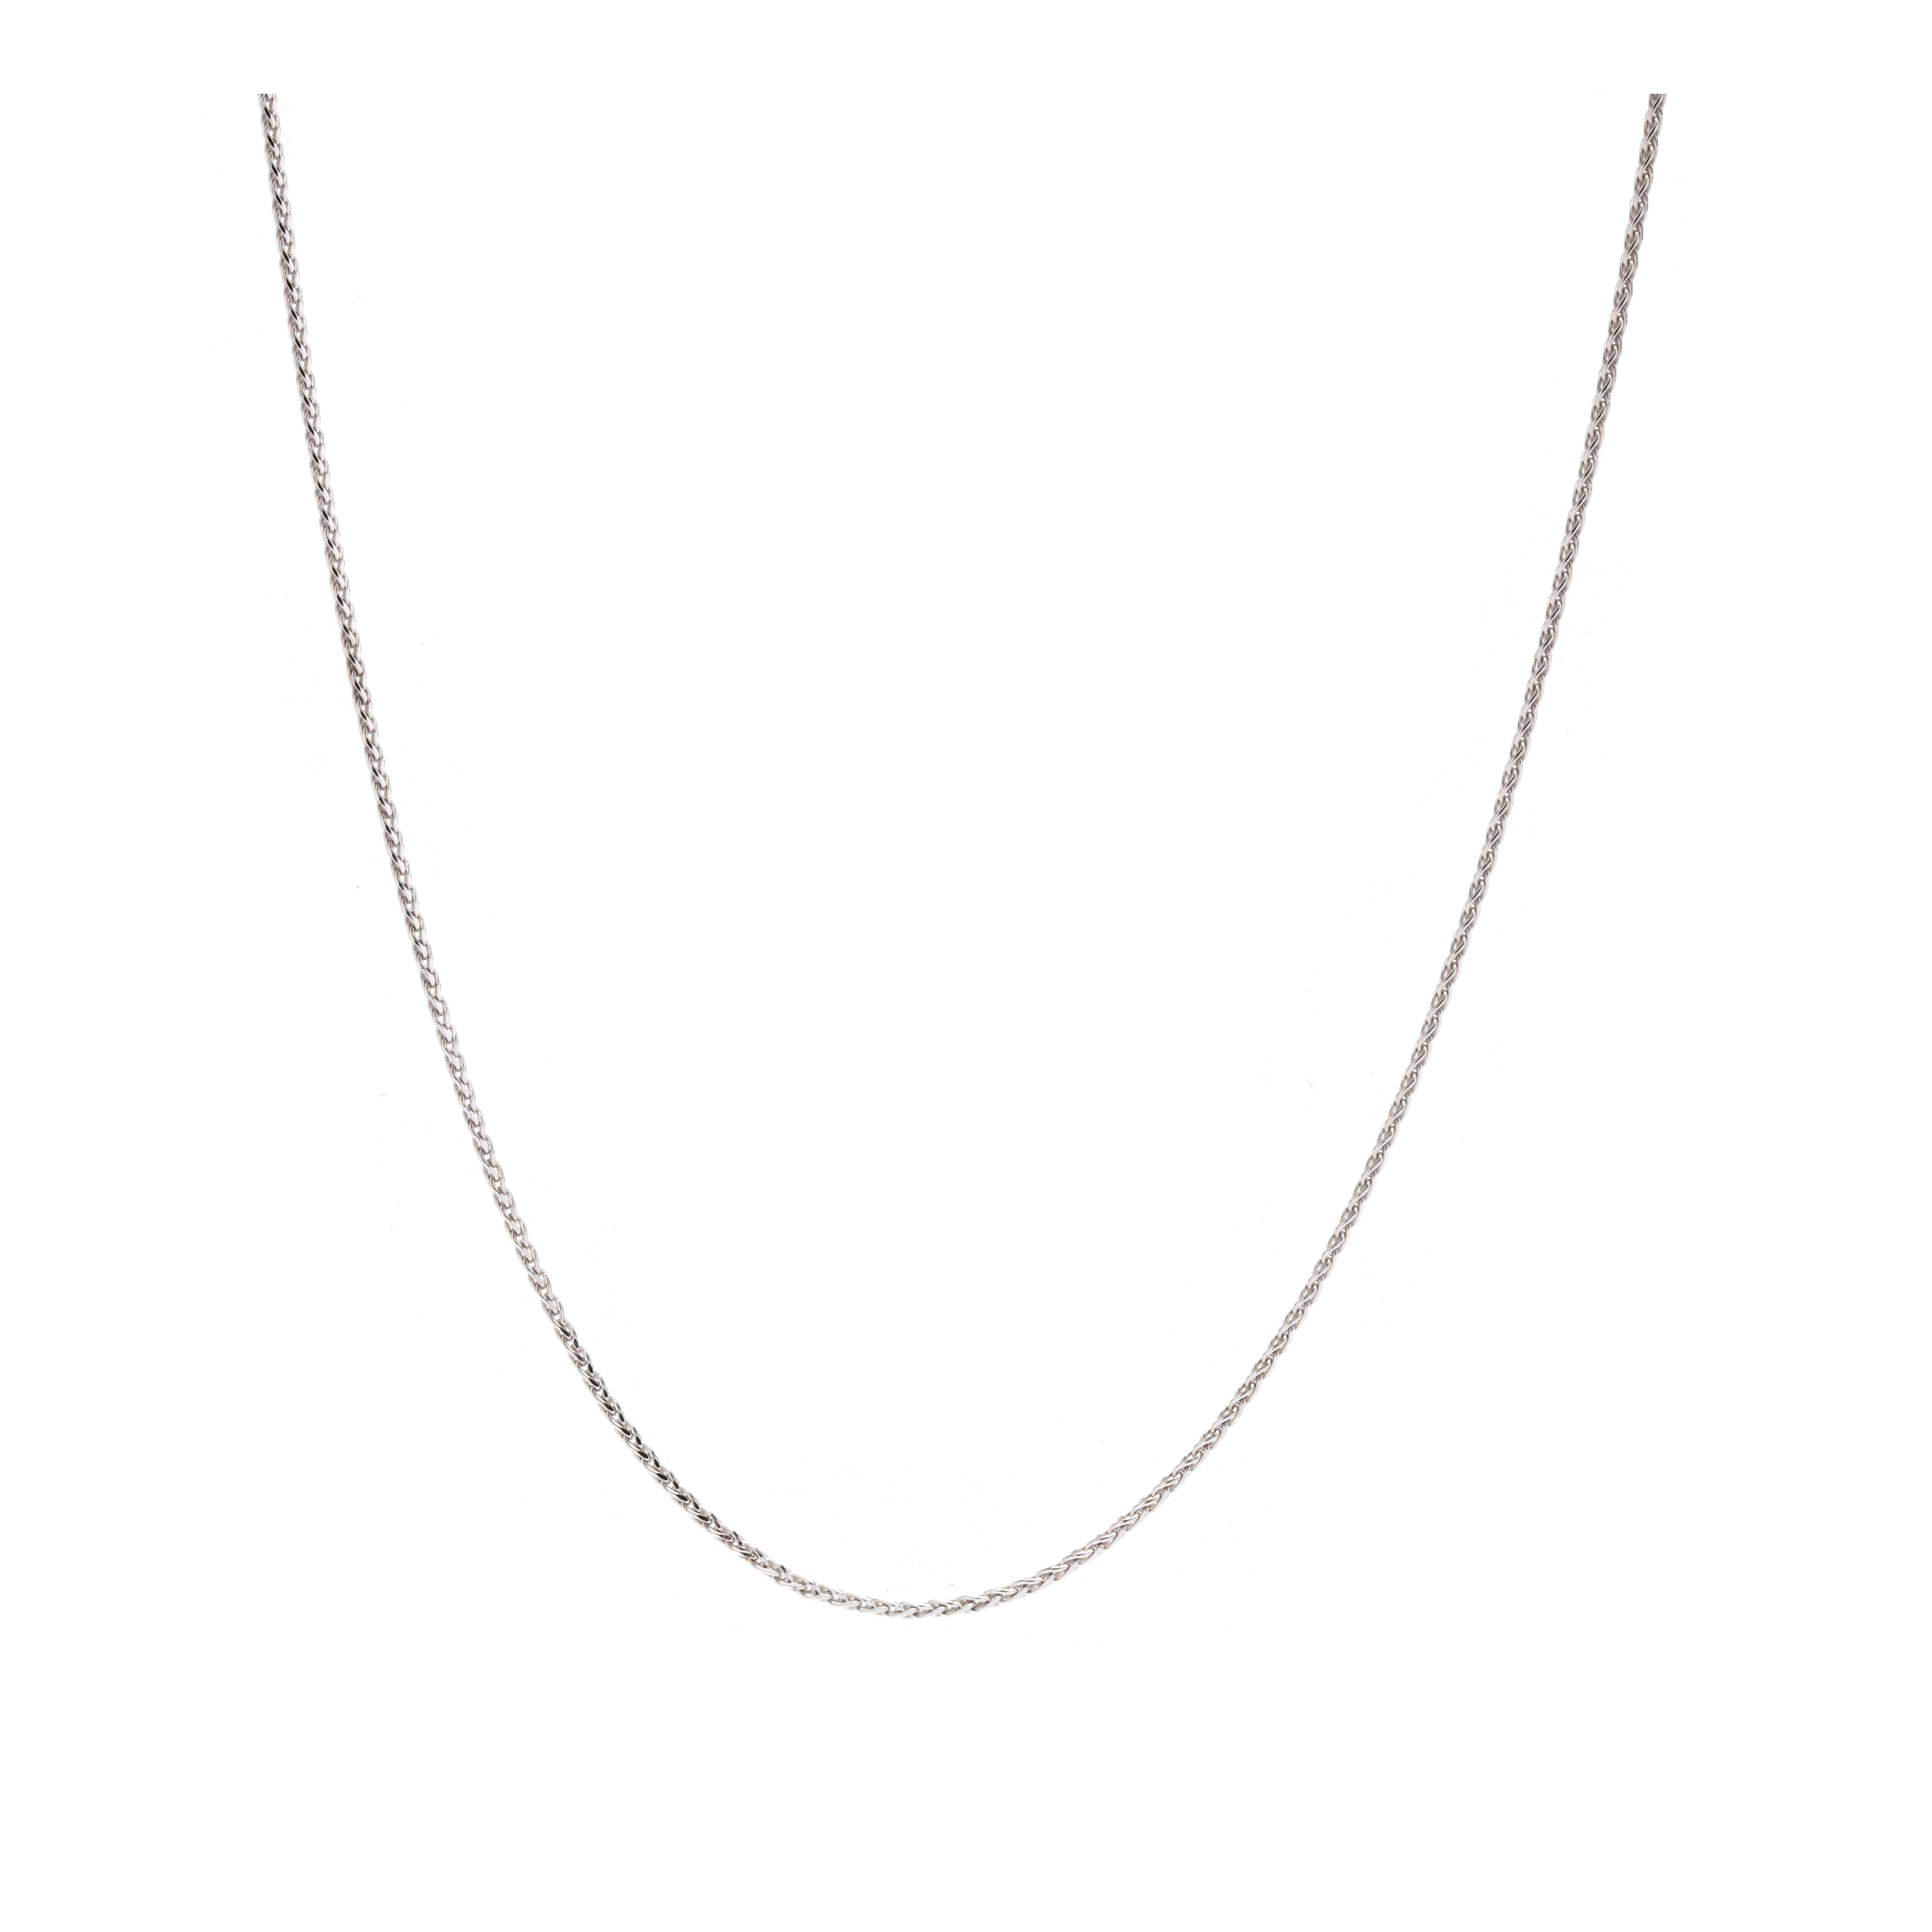 Women's or Men's Vintage 14kT White Gold Wheat Chain For Sale